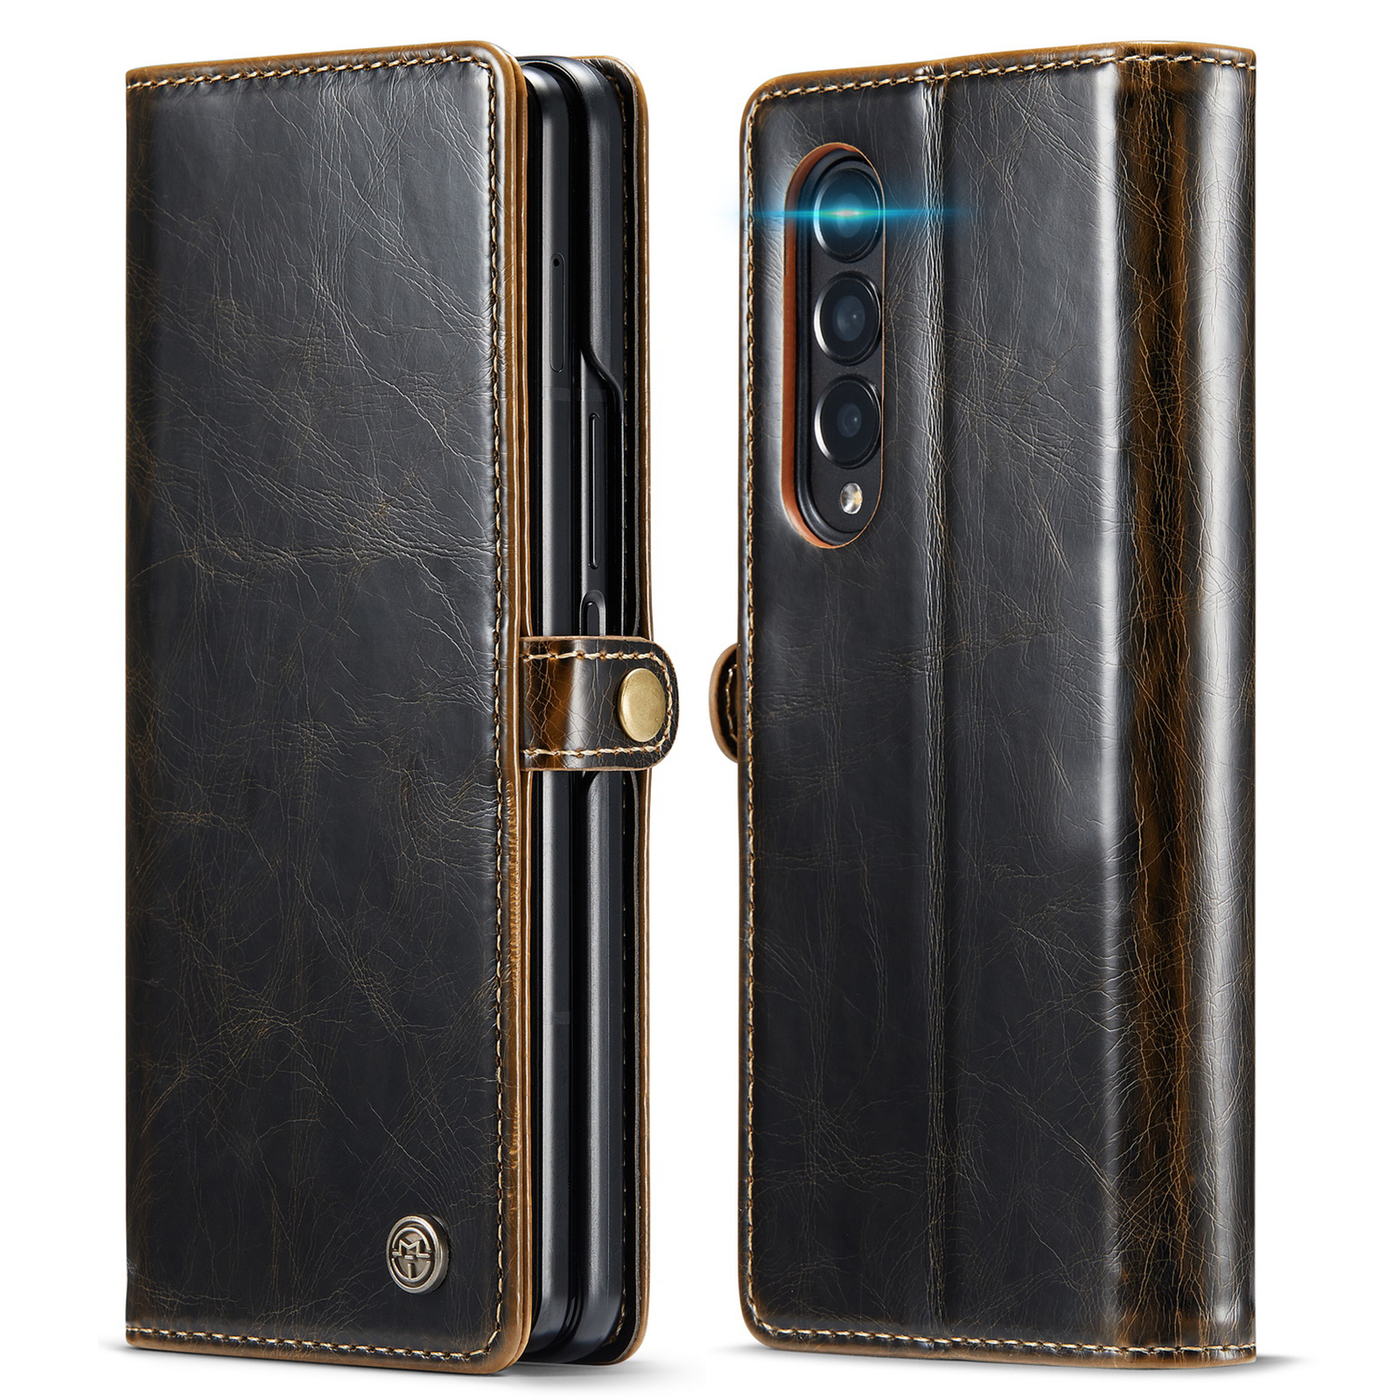 Samsung Galaxy Z Fold3 brown color leather wallet flip cover case By excelsior